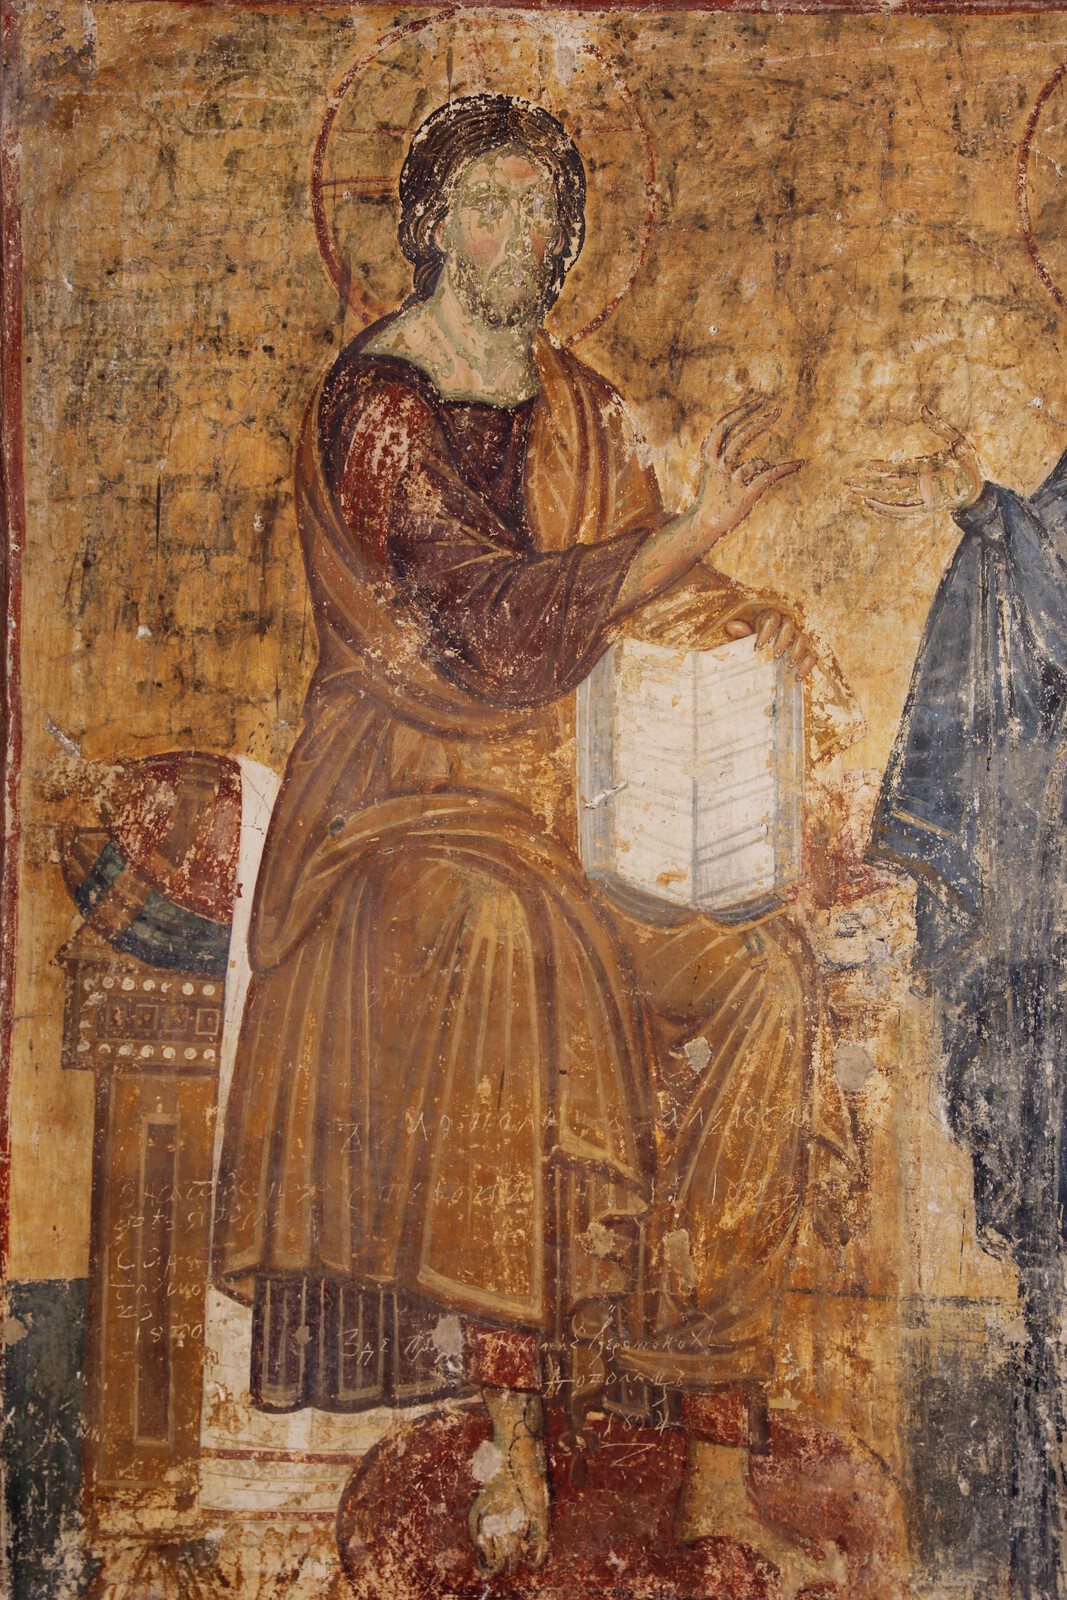 Founder's composition, detail, between 1222 and 1227